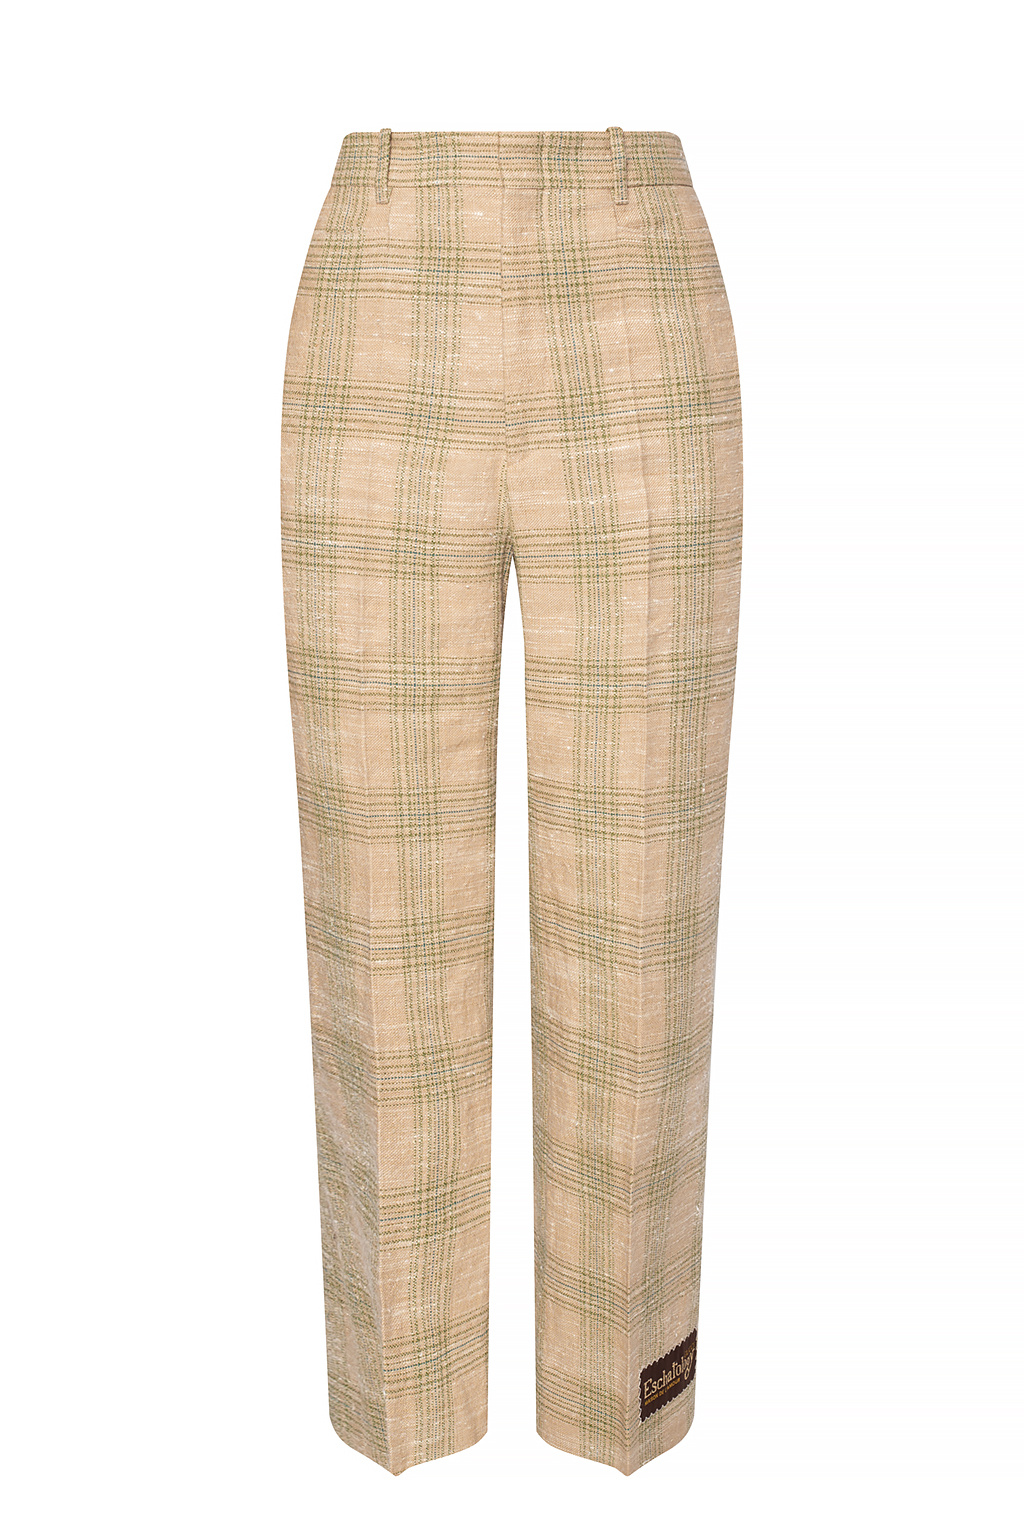 Gucci Pleat-front trousers | Women's Clothing | Vitkac